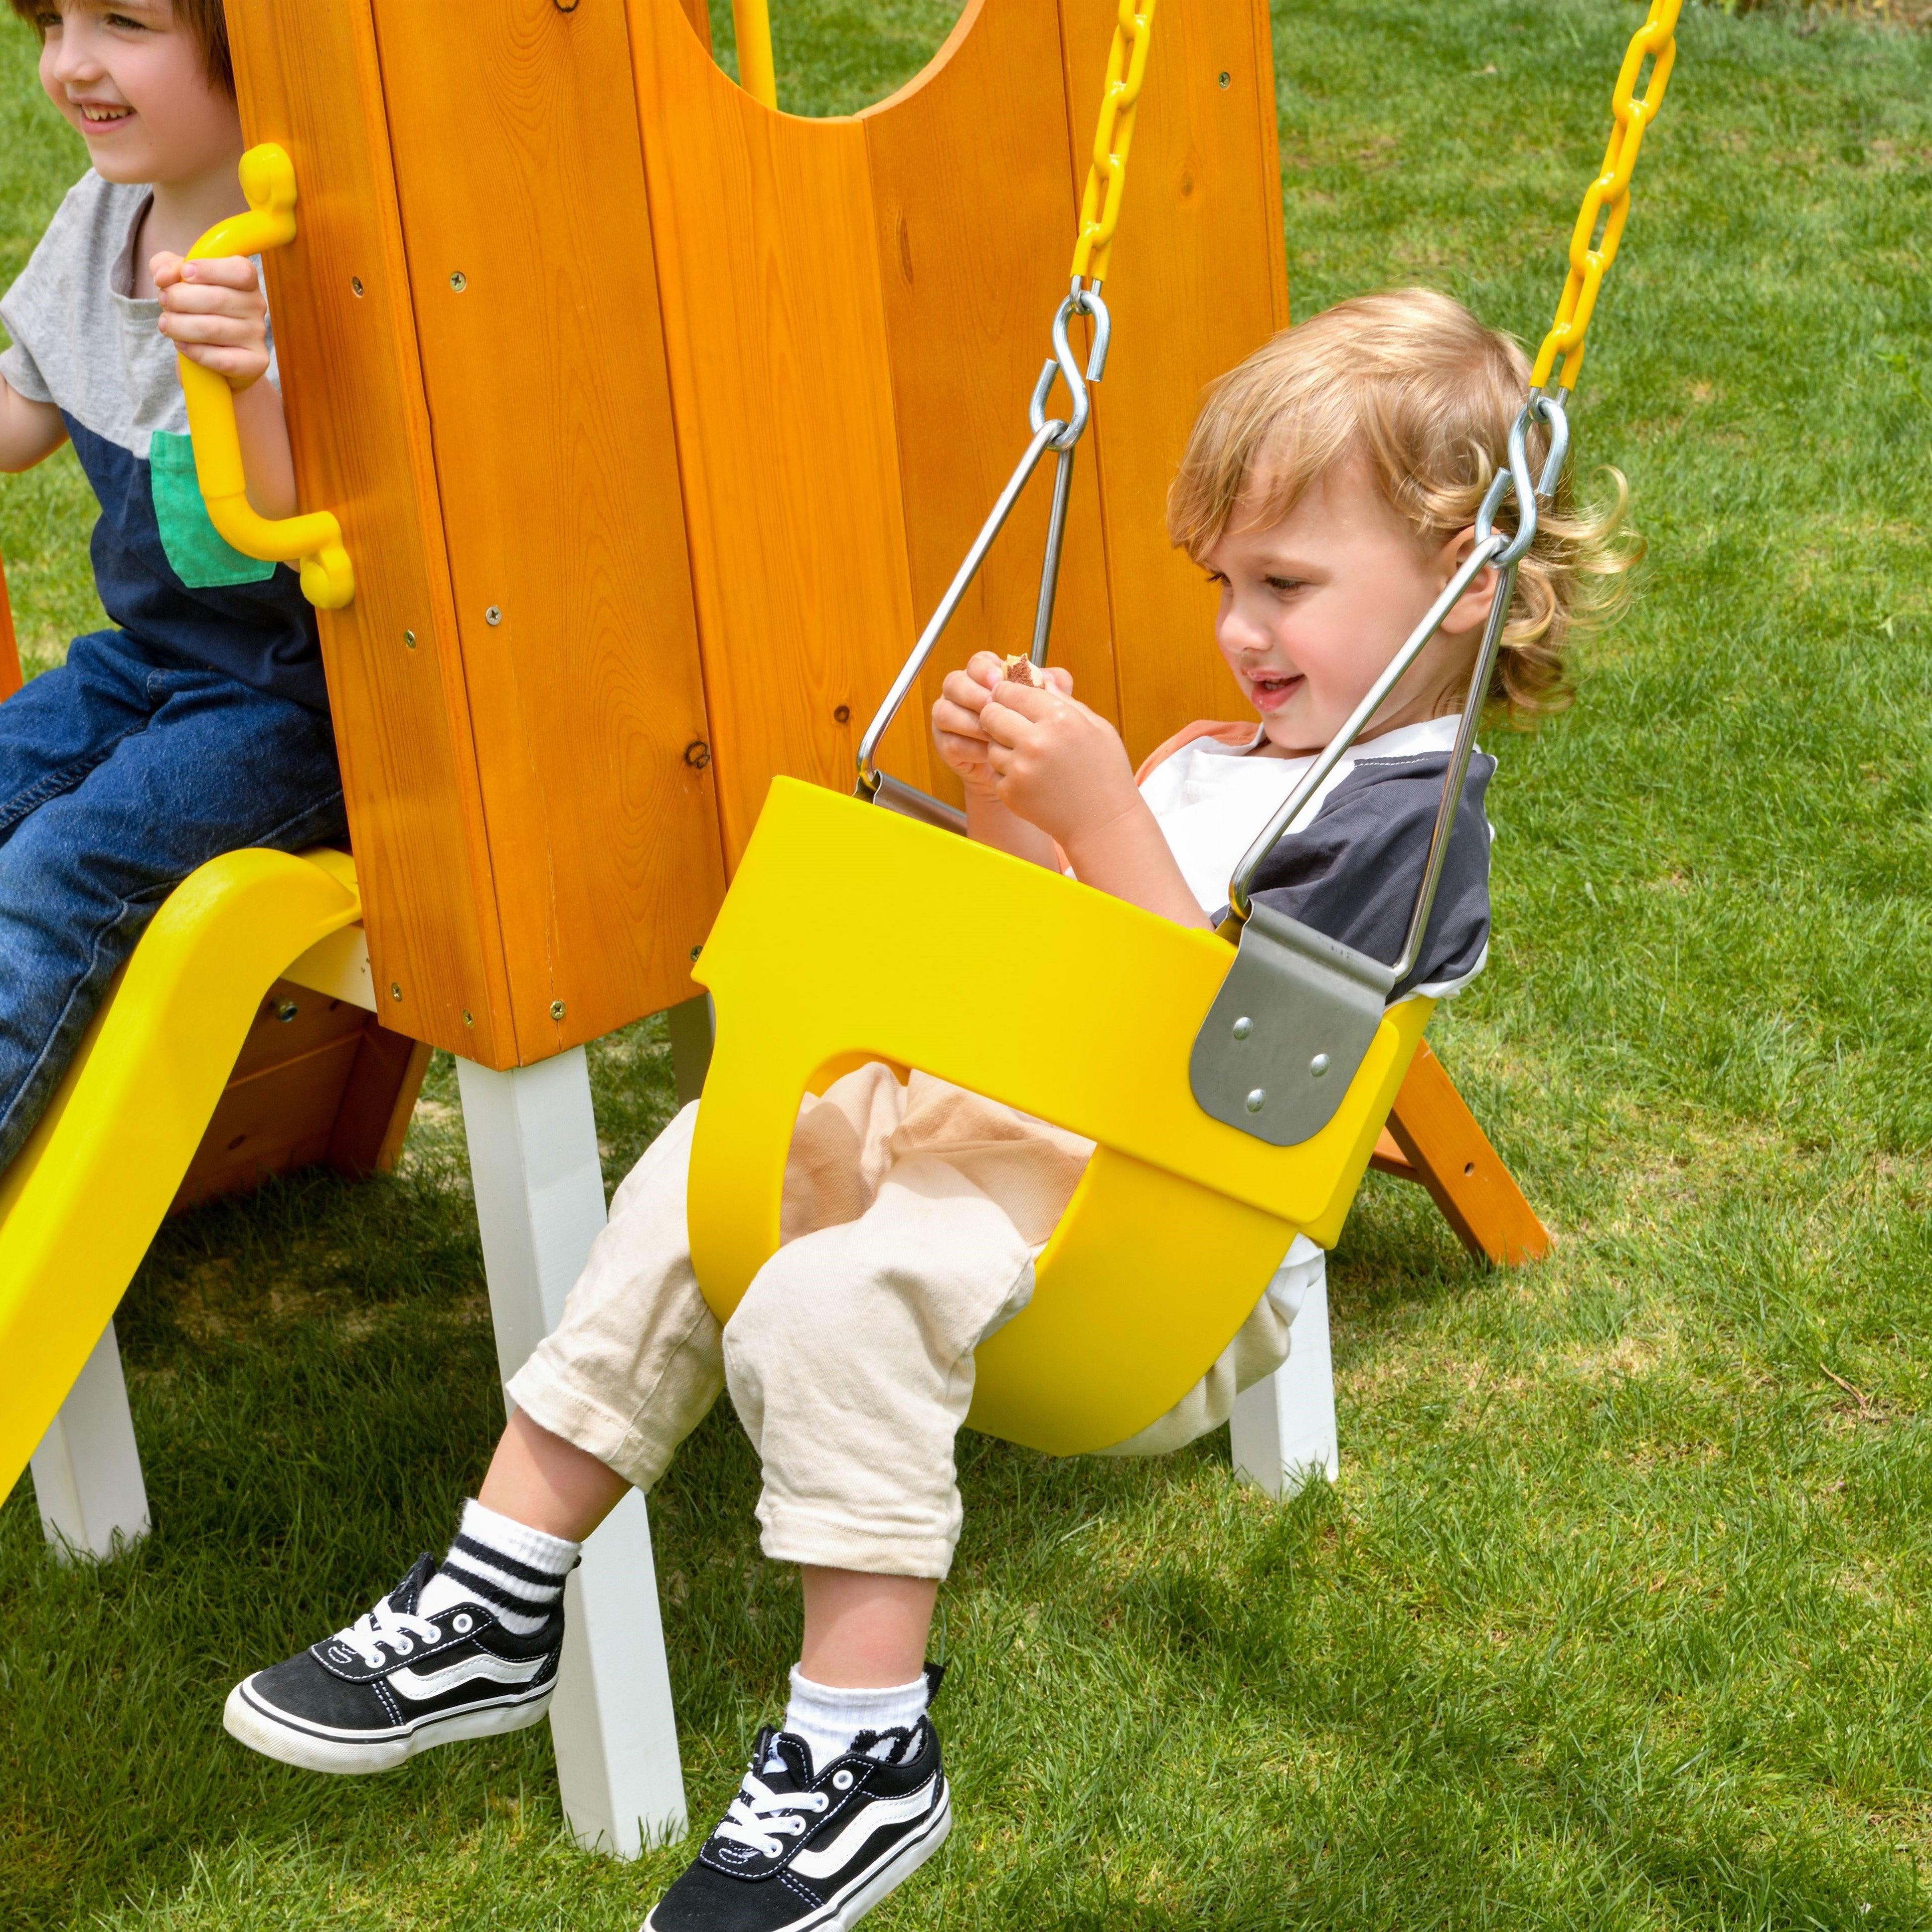 Forest Small - Outdoor Toddler Swing set